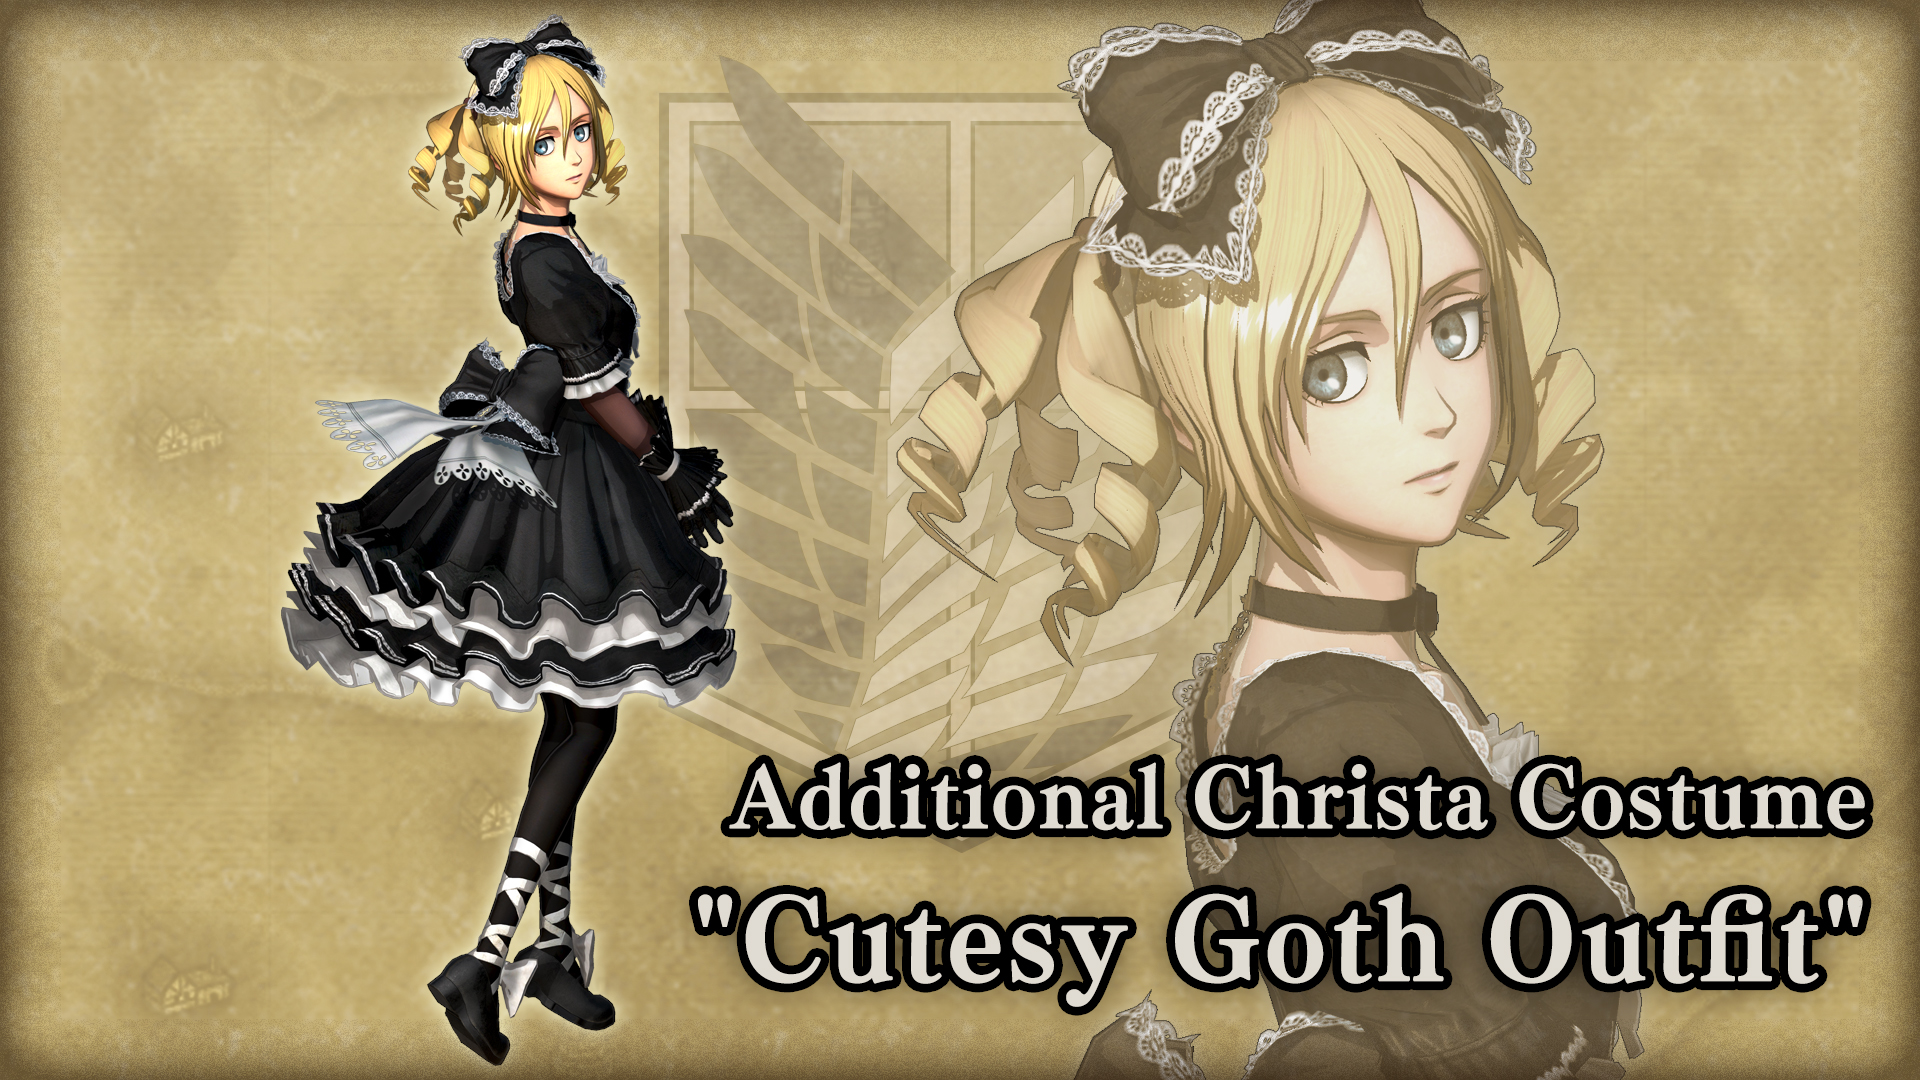 Additional Christa Costume: "Cutesy Goth Outfit"